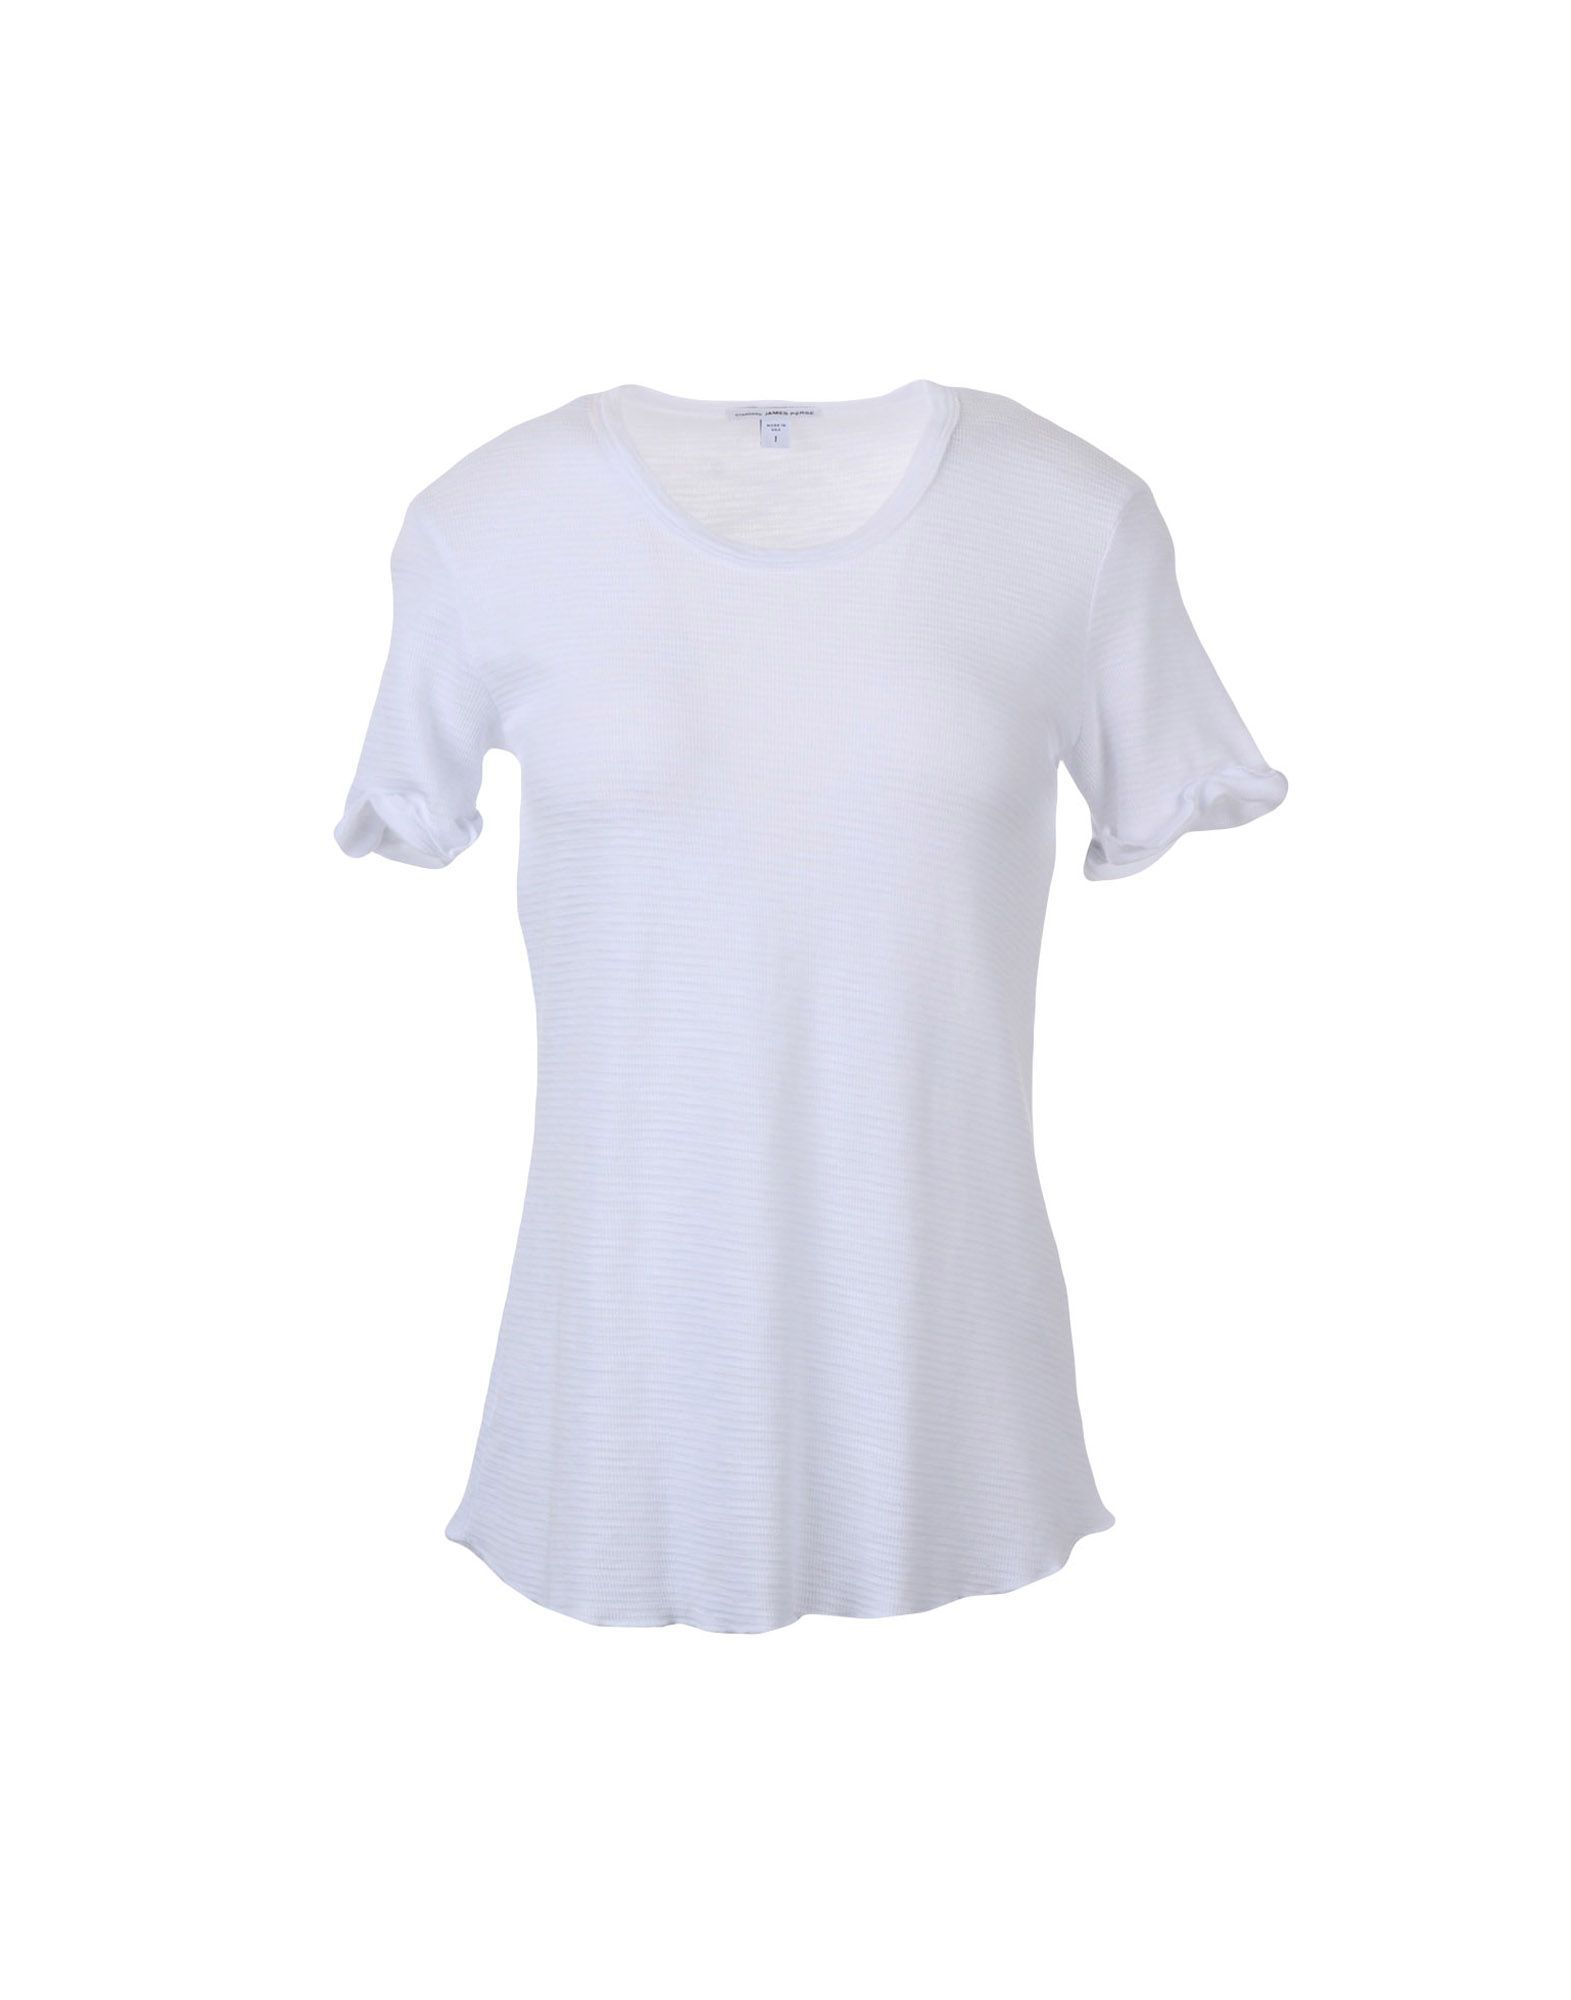 jersey, solid colour, round collar, no appliqués, short sleeves